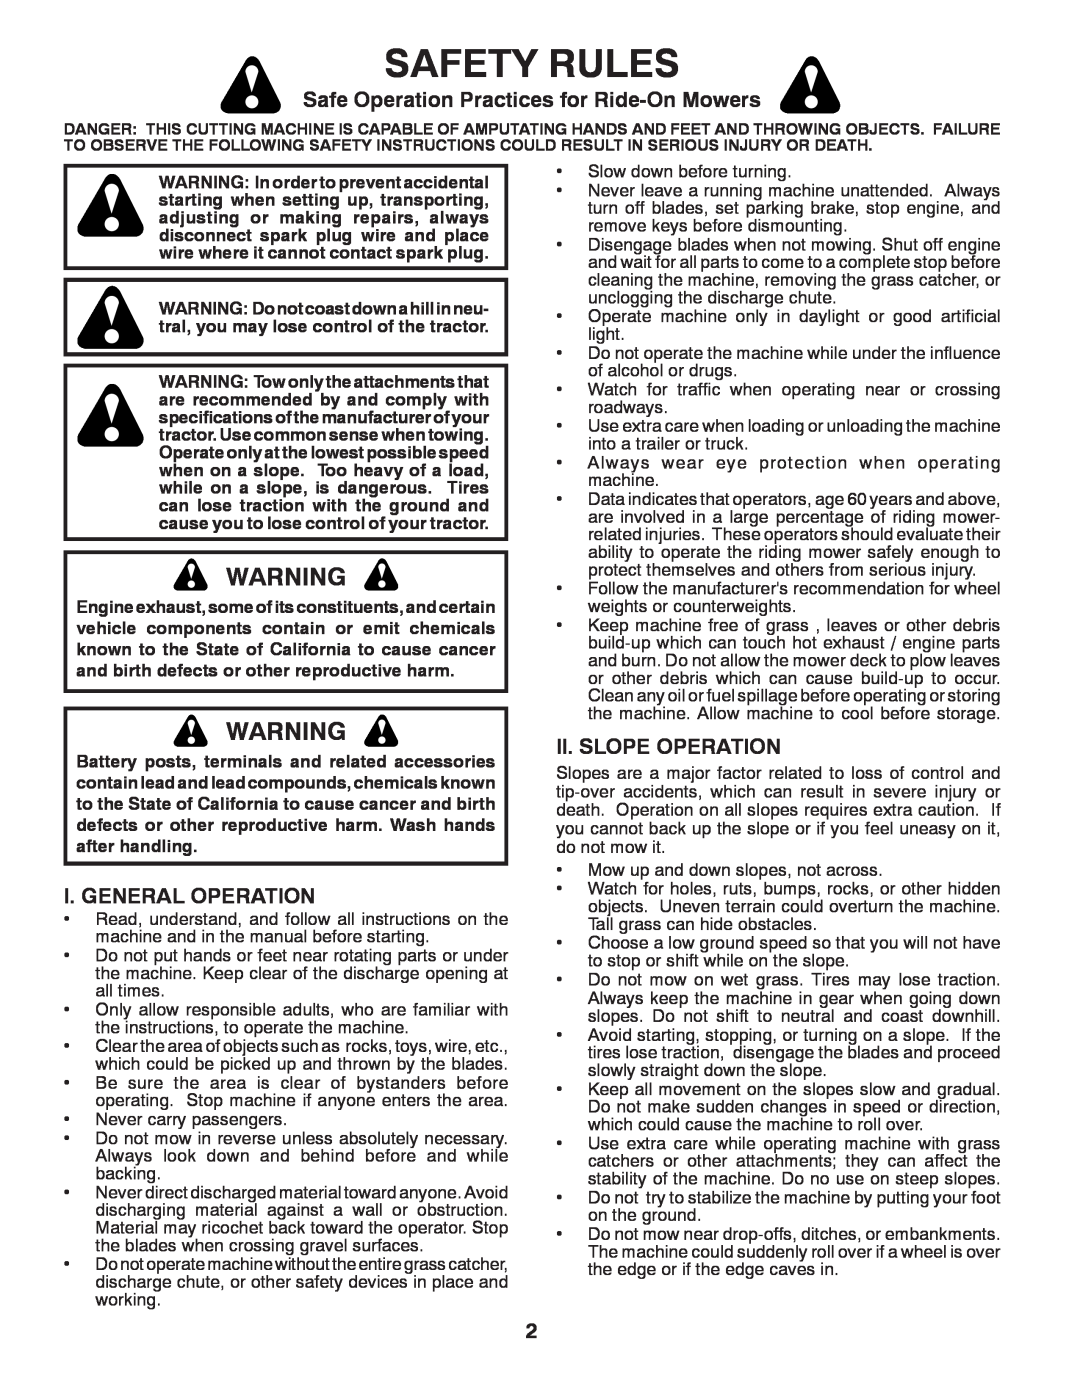 McCulloch 96042011500 Safety Rules, Safe Operation Practices for Ride-OnMowers, I. General Operation, Ii. Slope Operation 